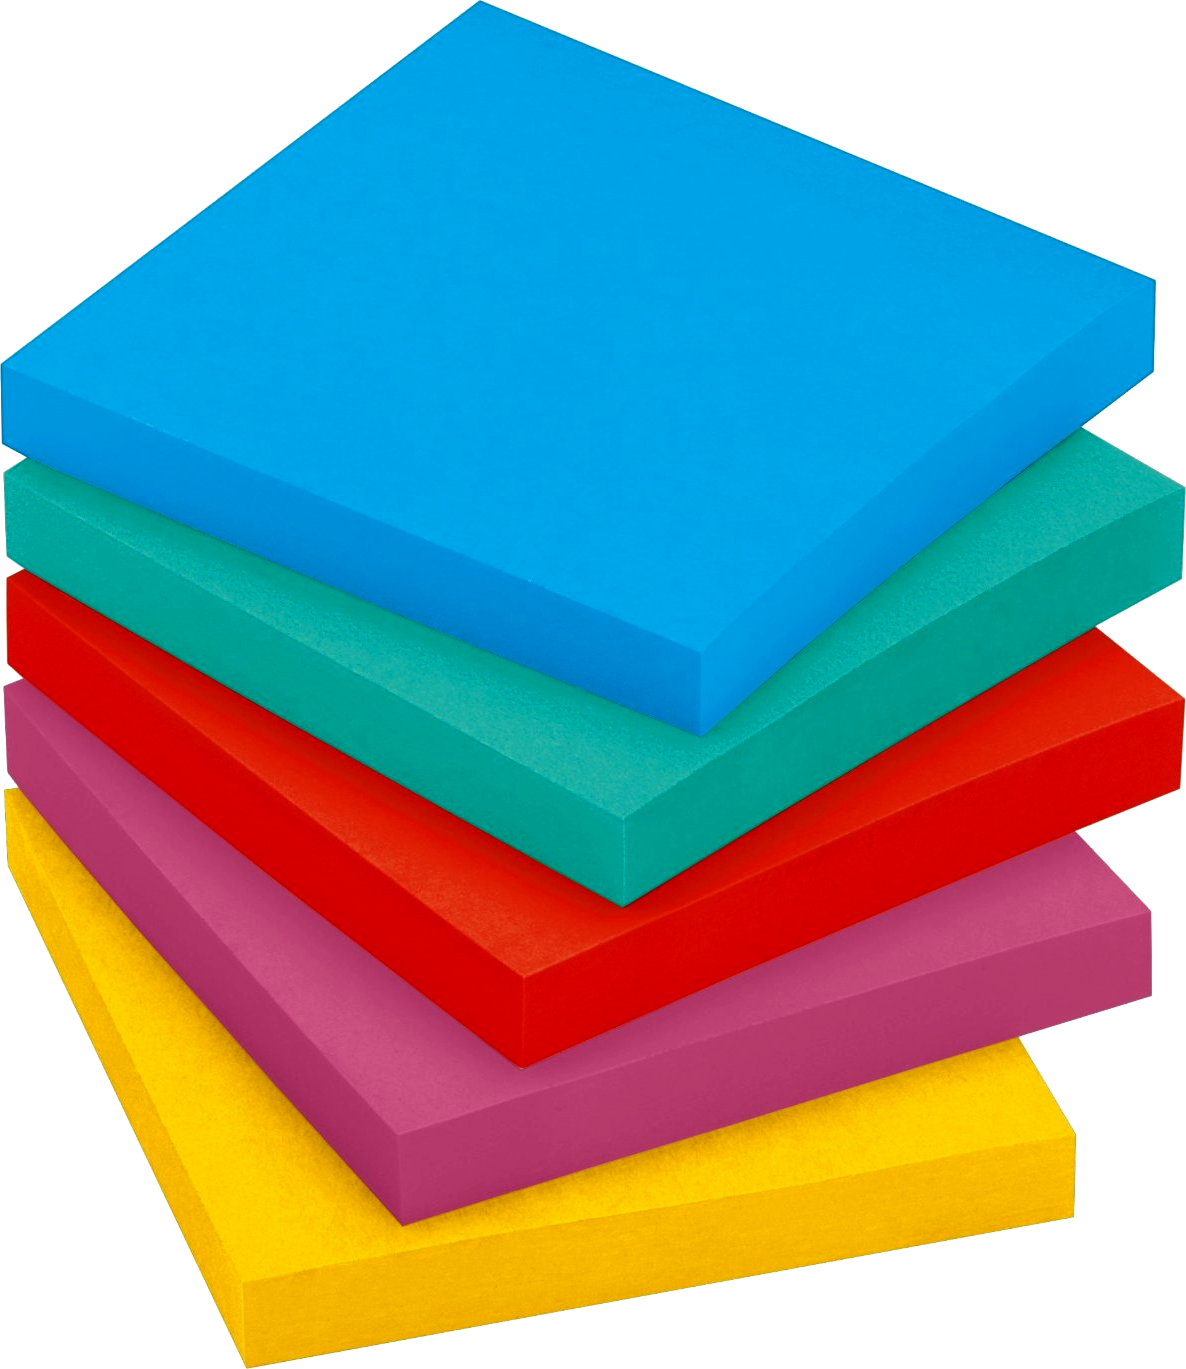 Colorful Stacked Post It Notes PNG image